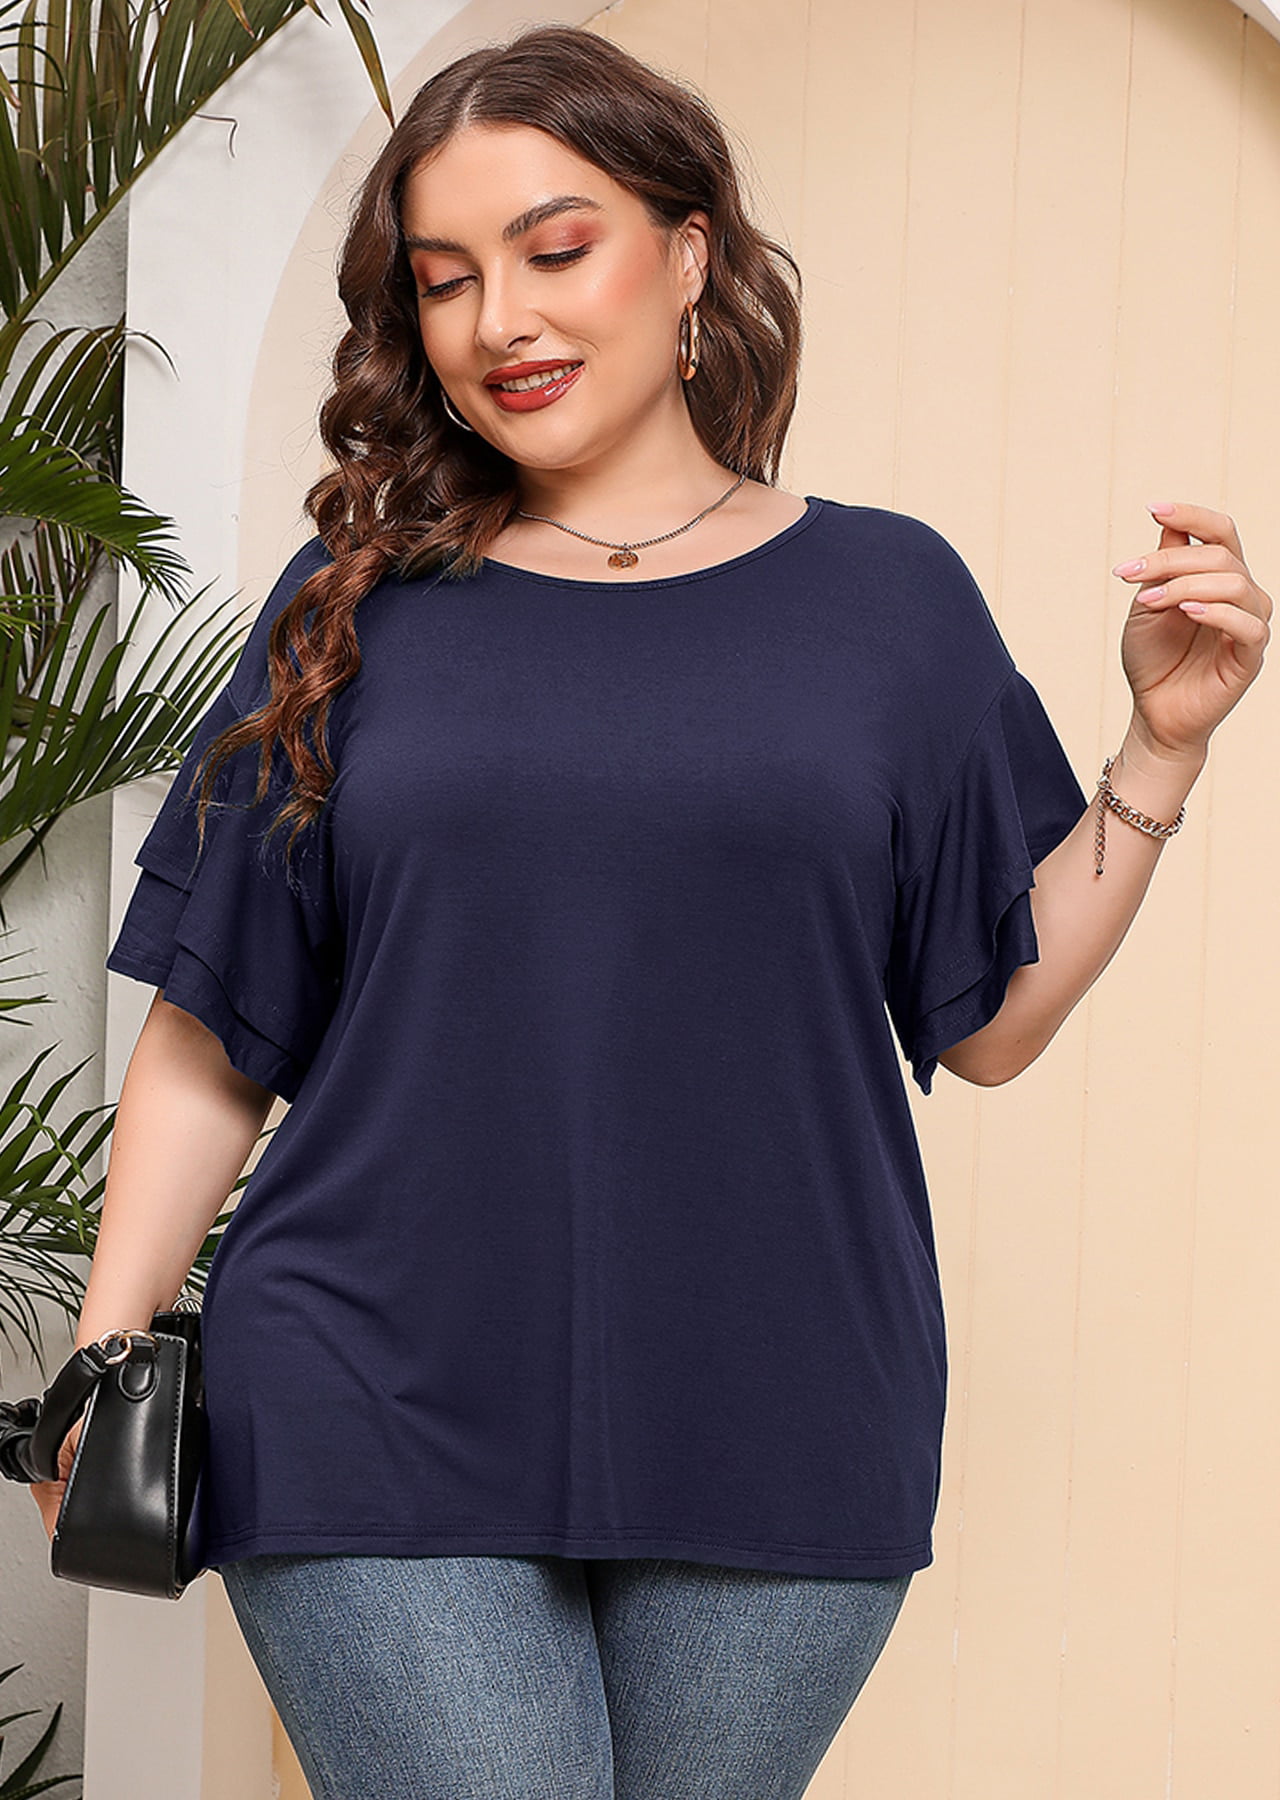 SHOWMALL Plus Size Clothes for Women Navy Blue 3X Shirt Crewneck Short  Sleeve Tunic Flowy Summer Loose Fitting Clothes 